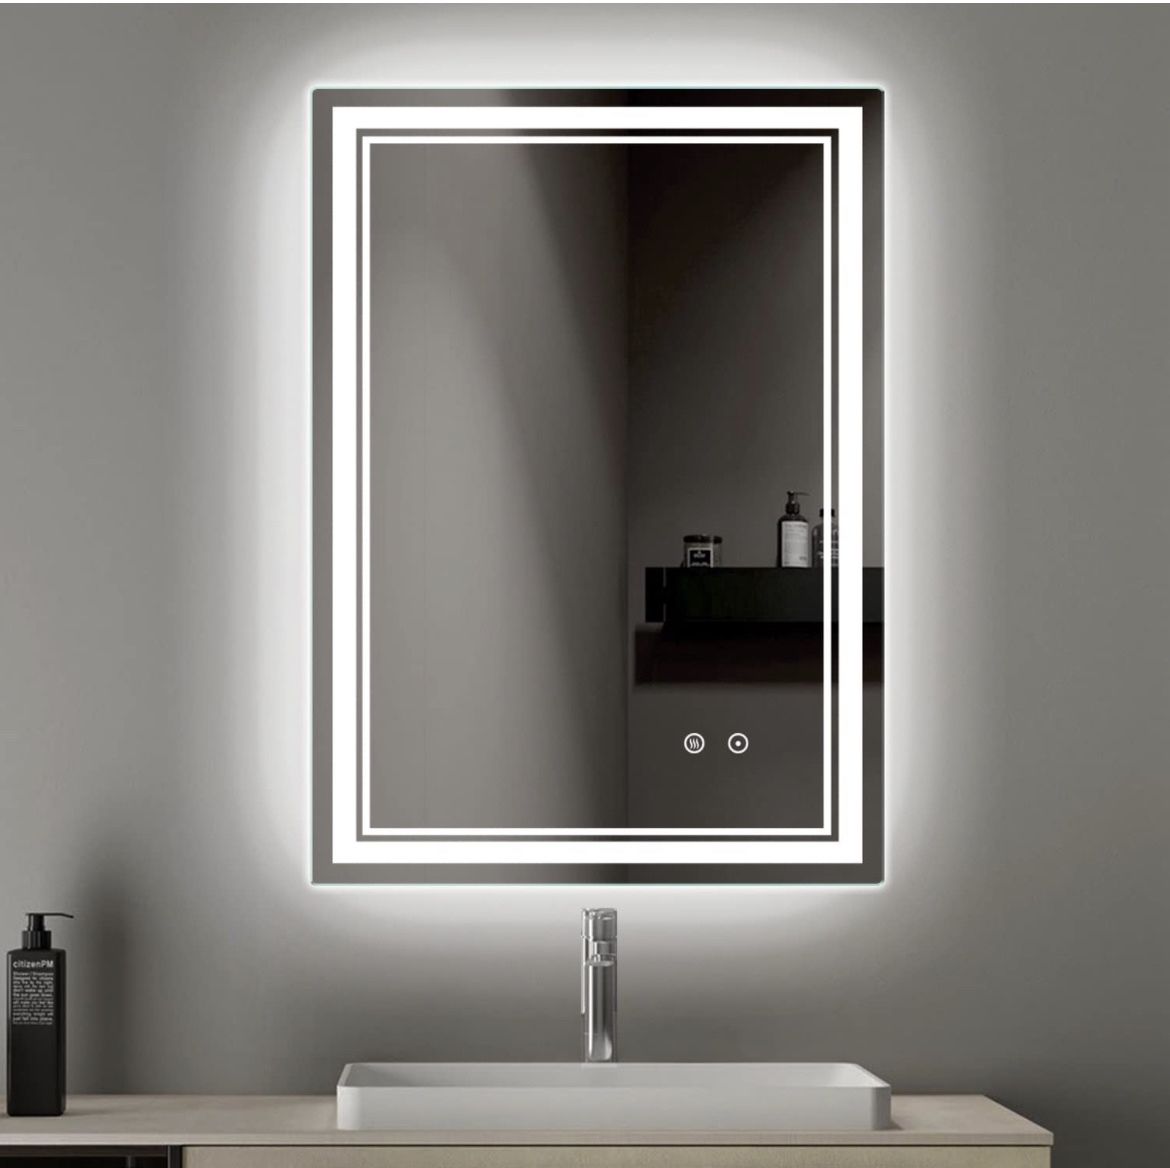 SSWW 20x28 Inch LED Mirror for Bathroom Wall Mounted Vanity Mirror with Lights 3 Colors Dimmable Anti-Fog Lighted Bathroom Mirror Vertical/Horizontal